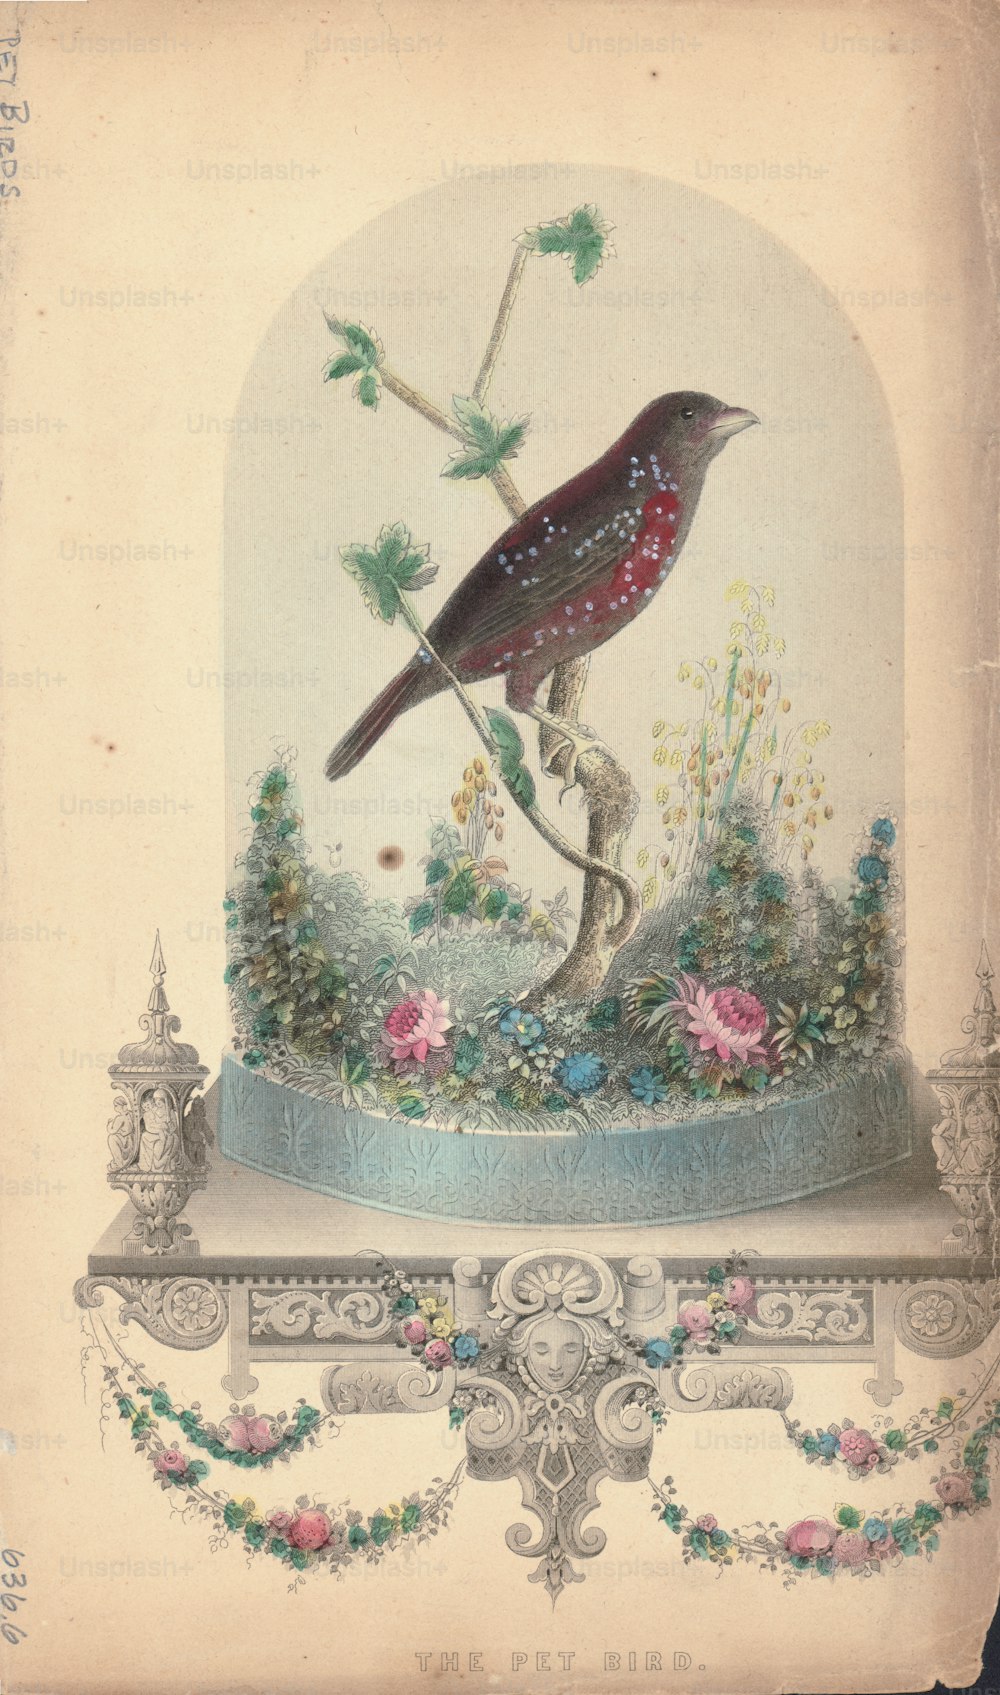 Color engraving of 'The pet bird', depicting an artistic impression of a pet bird and a tiny garden inside a glass dome. (Photo by Archive Photos/Getty Images)